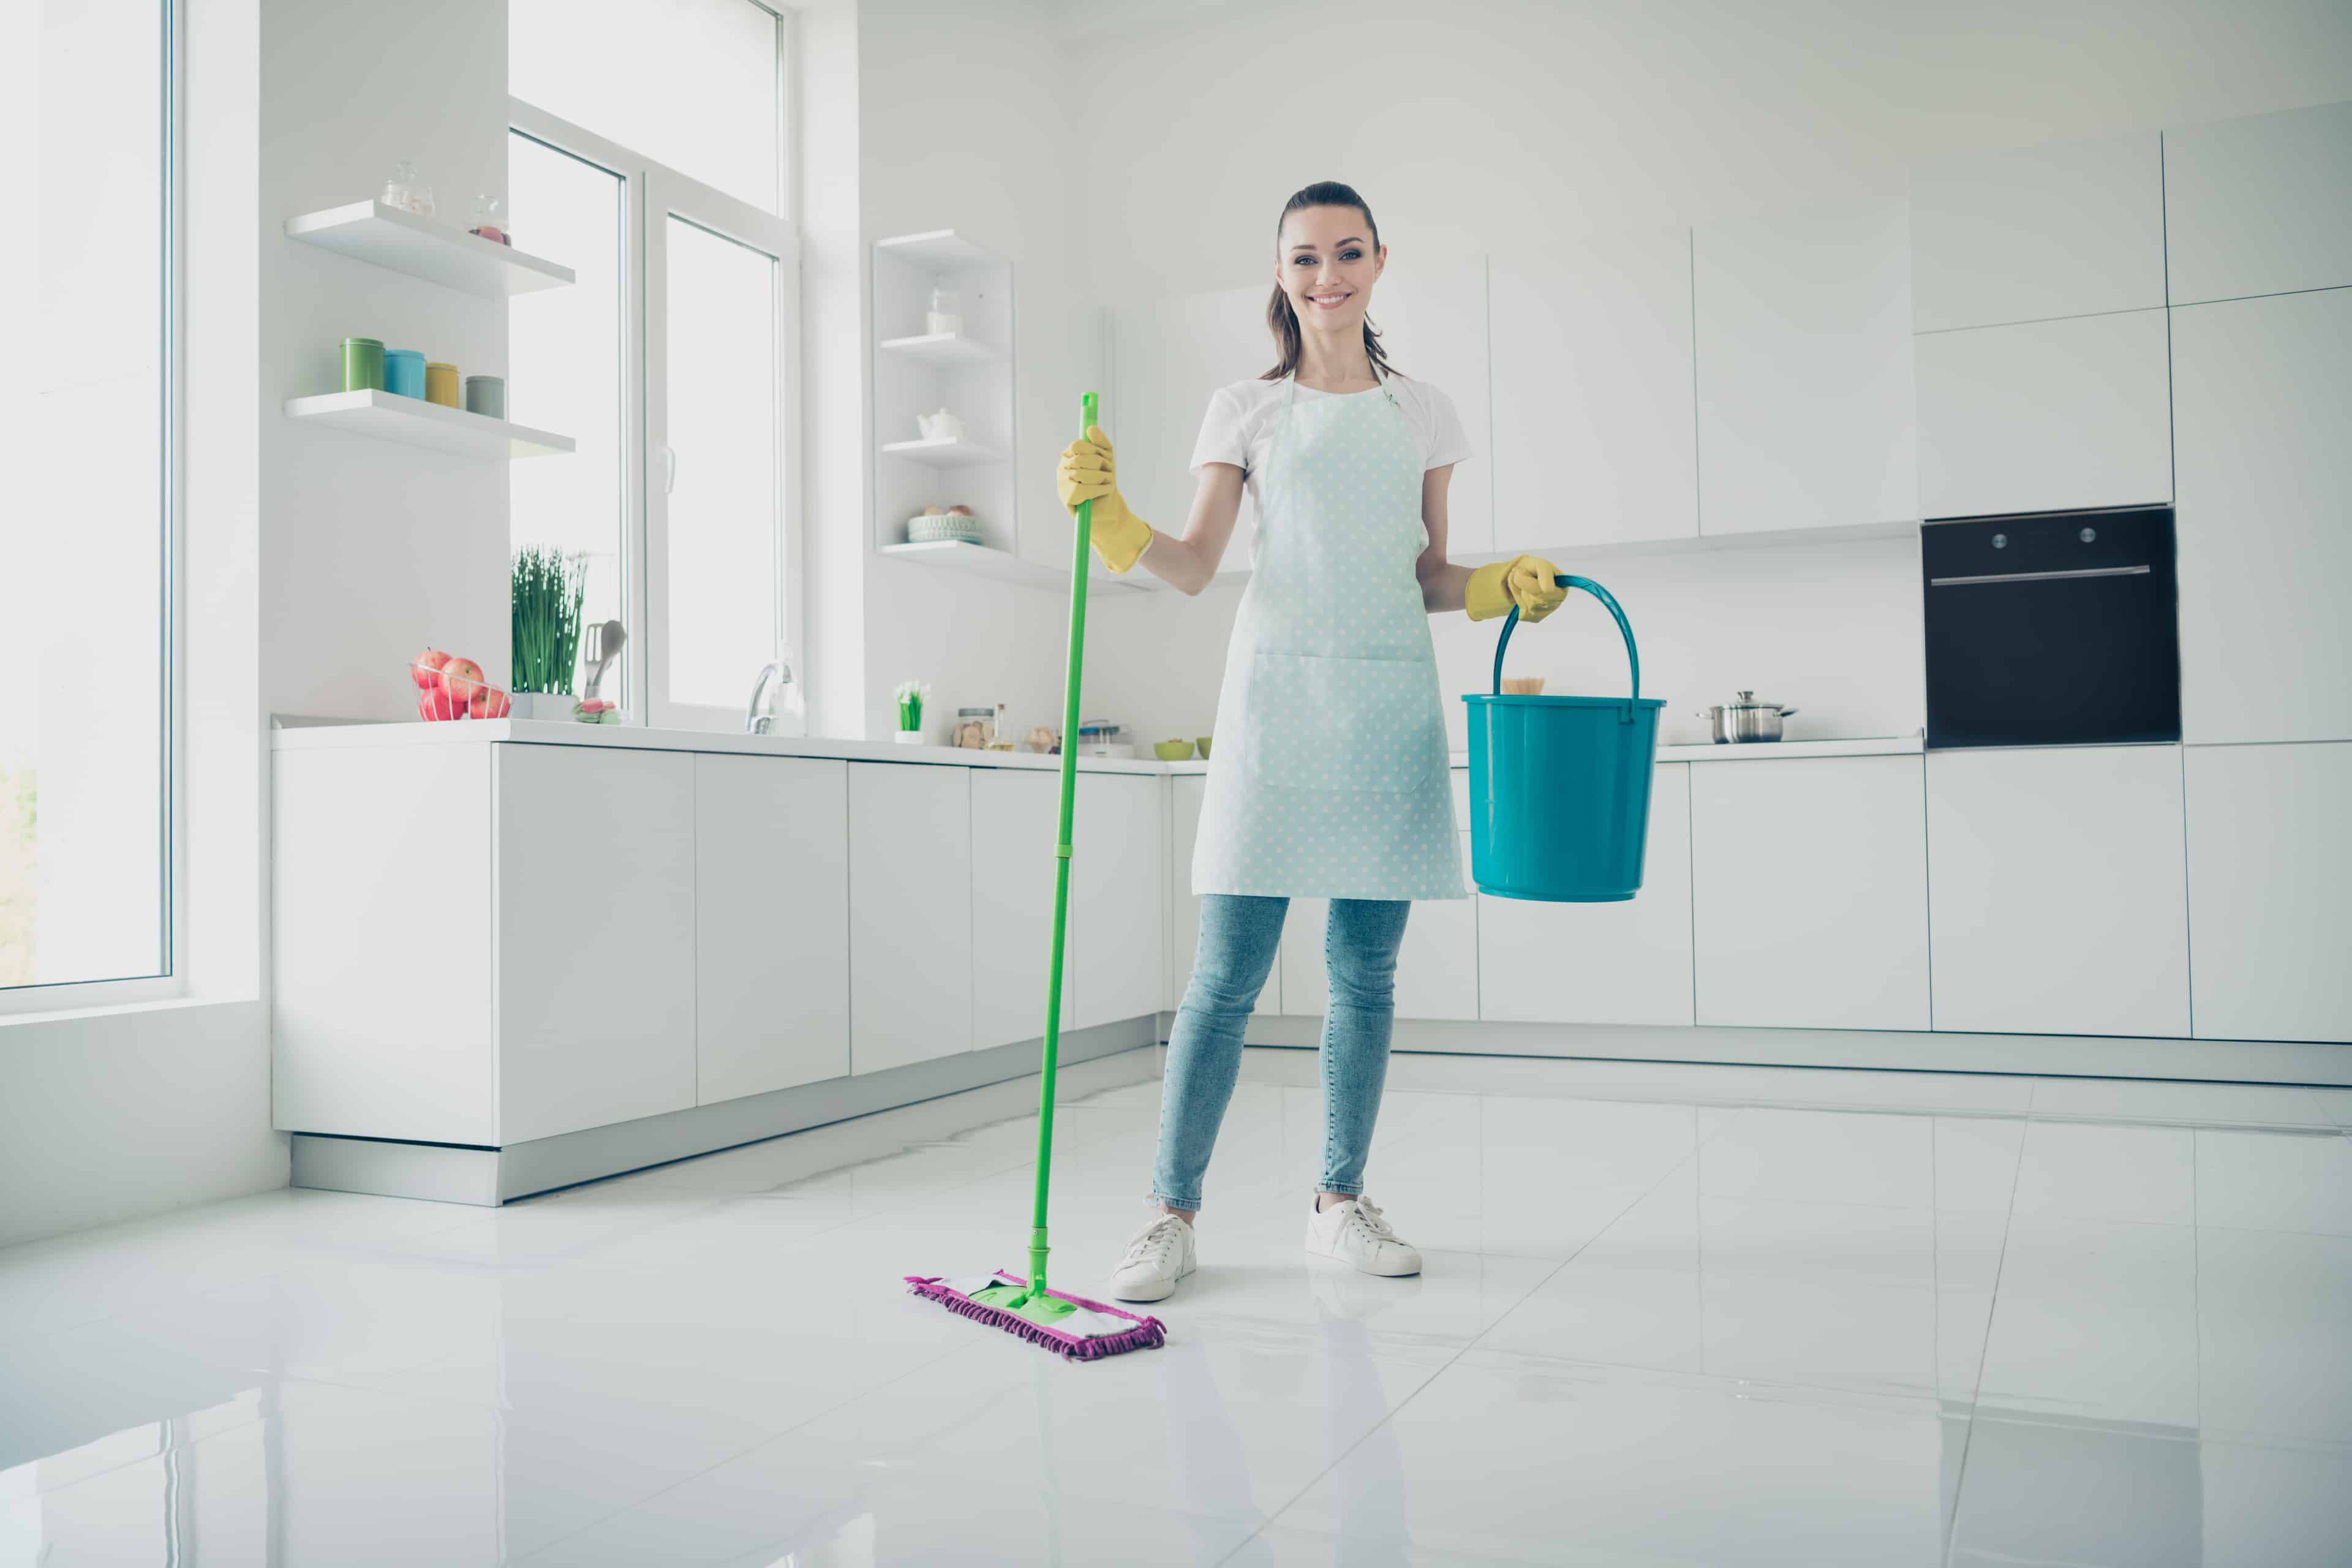 Woman with mop and bucket in kitchen keeping floors clean.